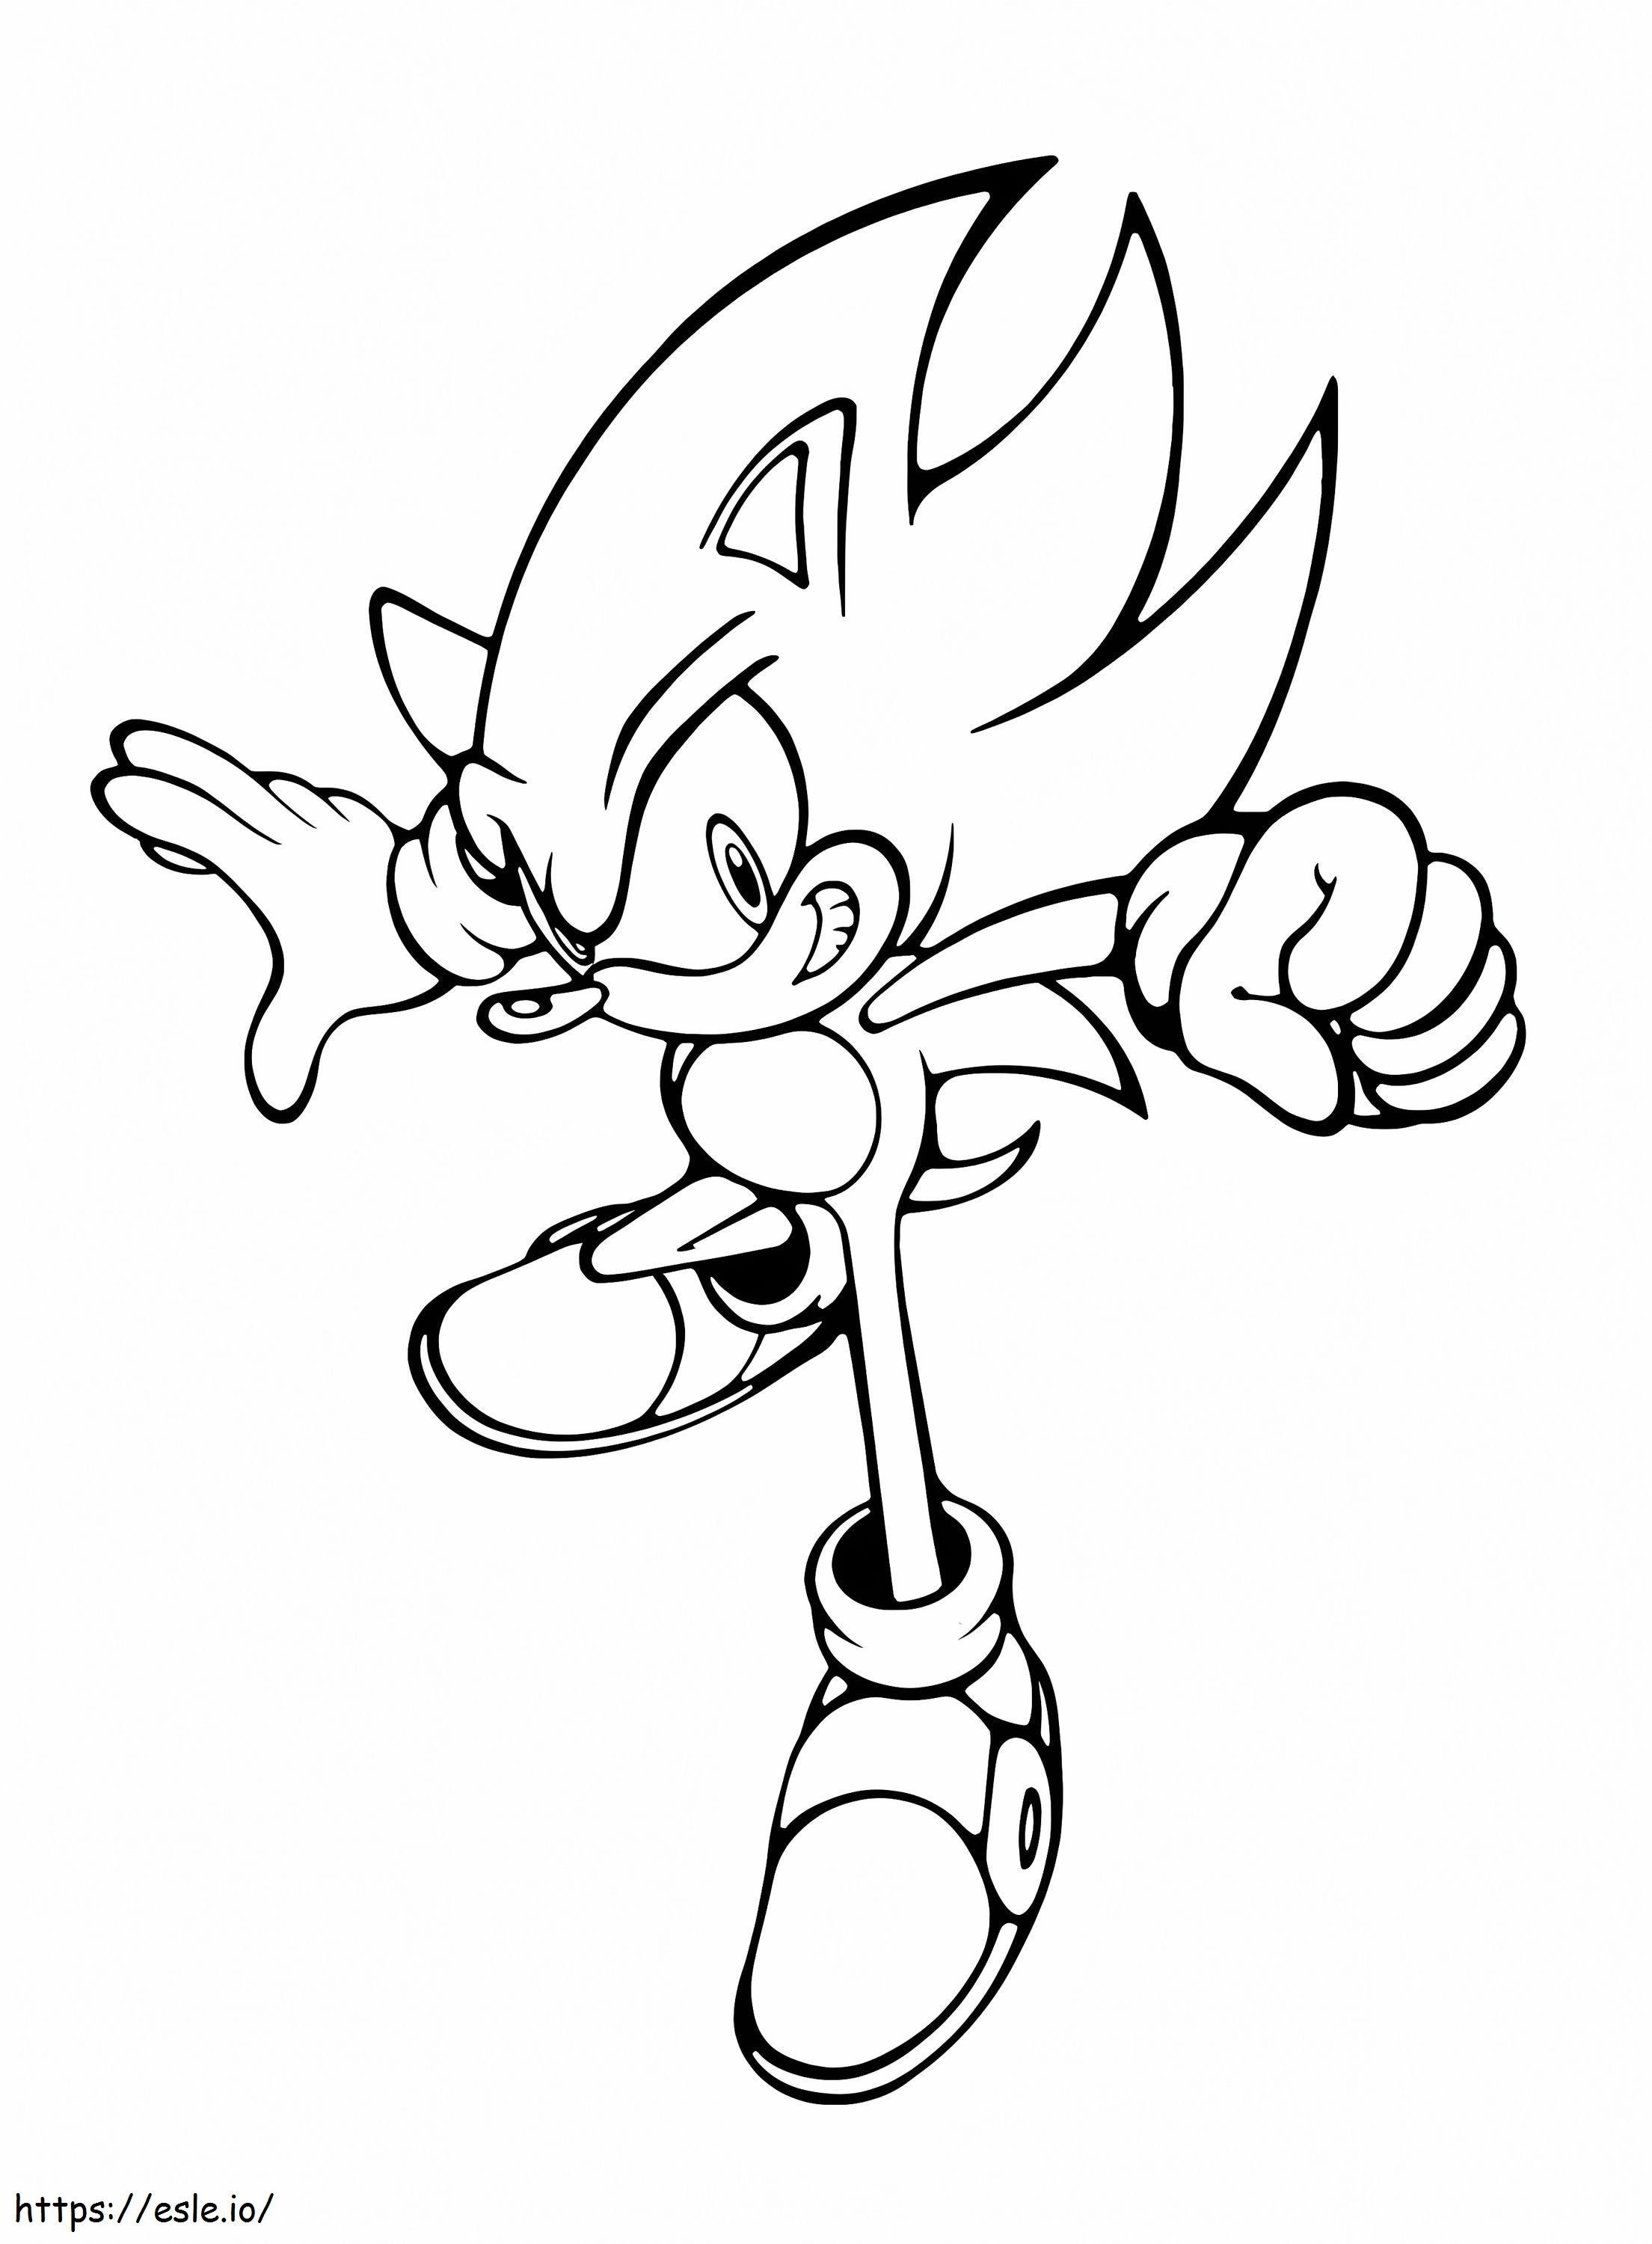 Print Sonic coloring page